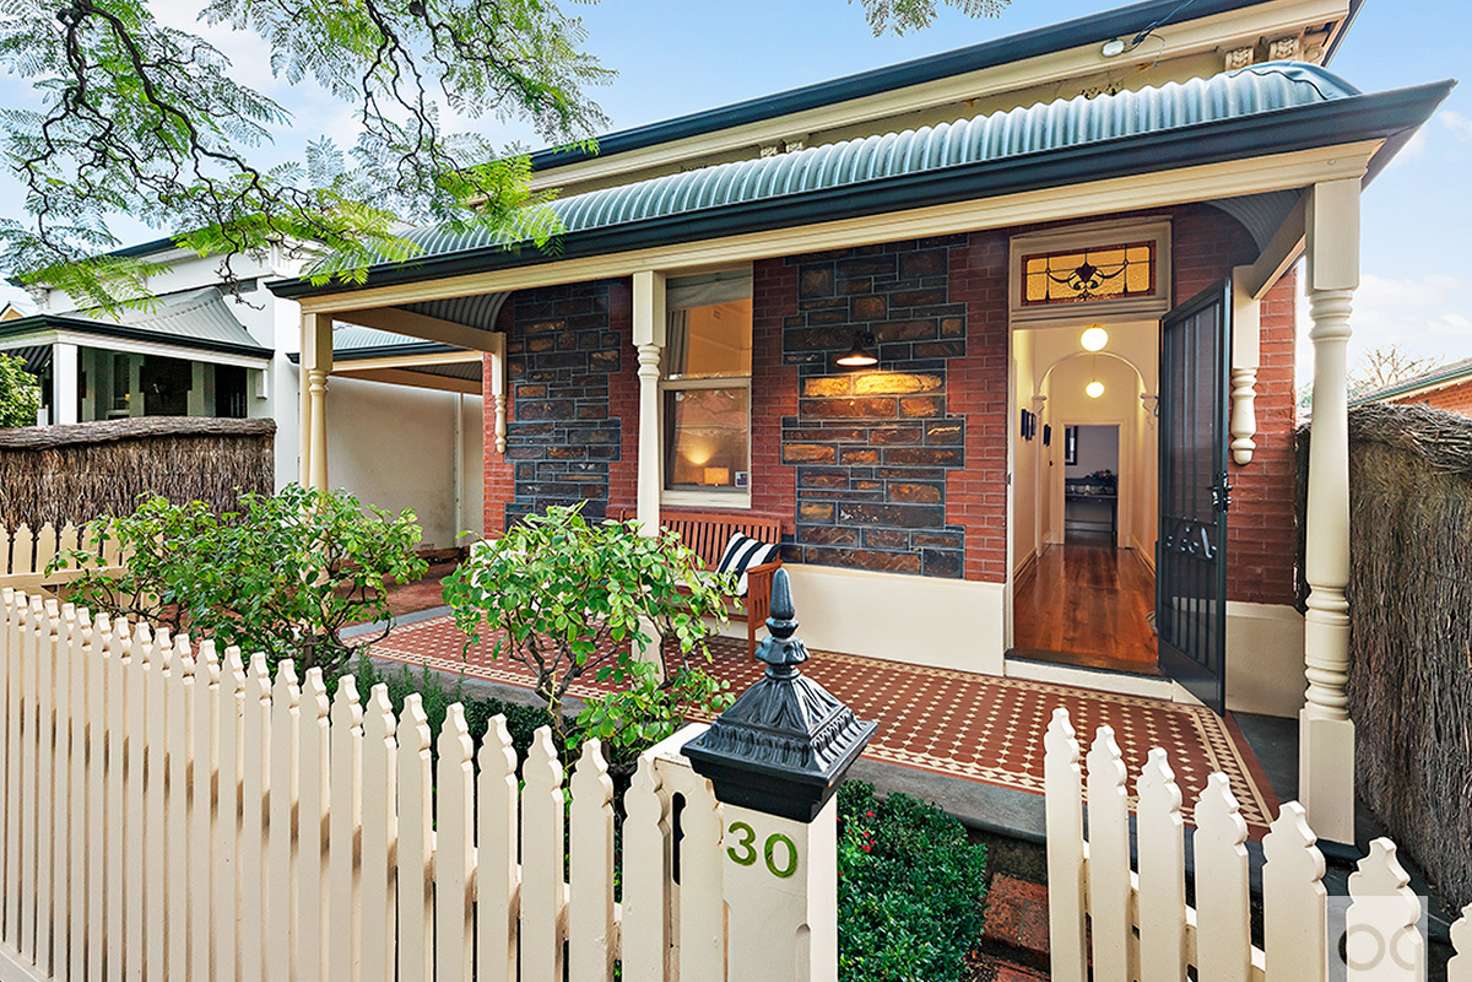 Main view of Homely house listing, 30 Denning Street, Hawthorn SA 5062